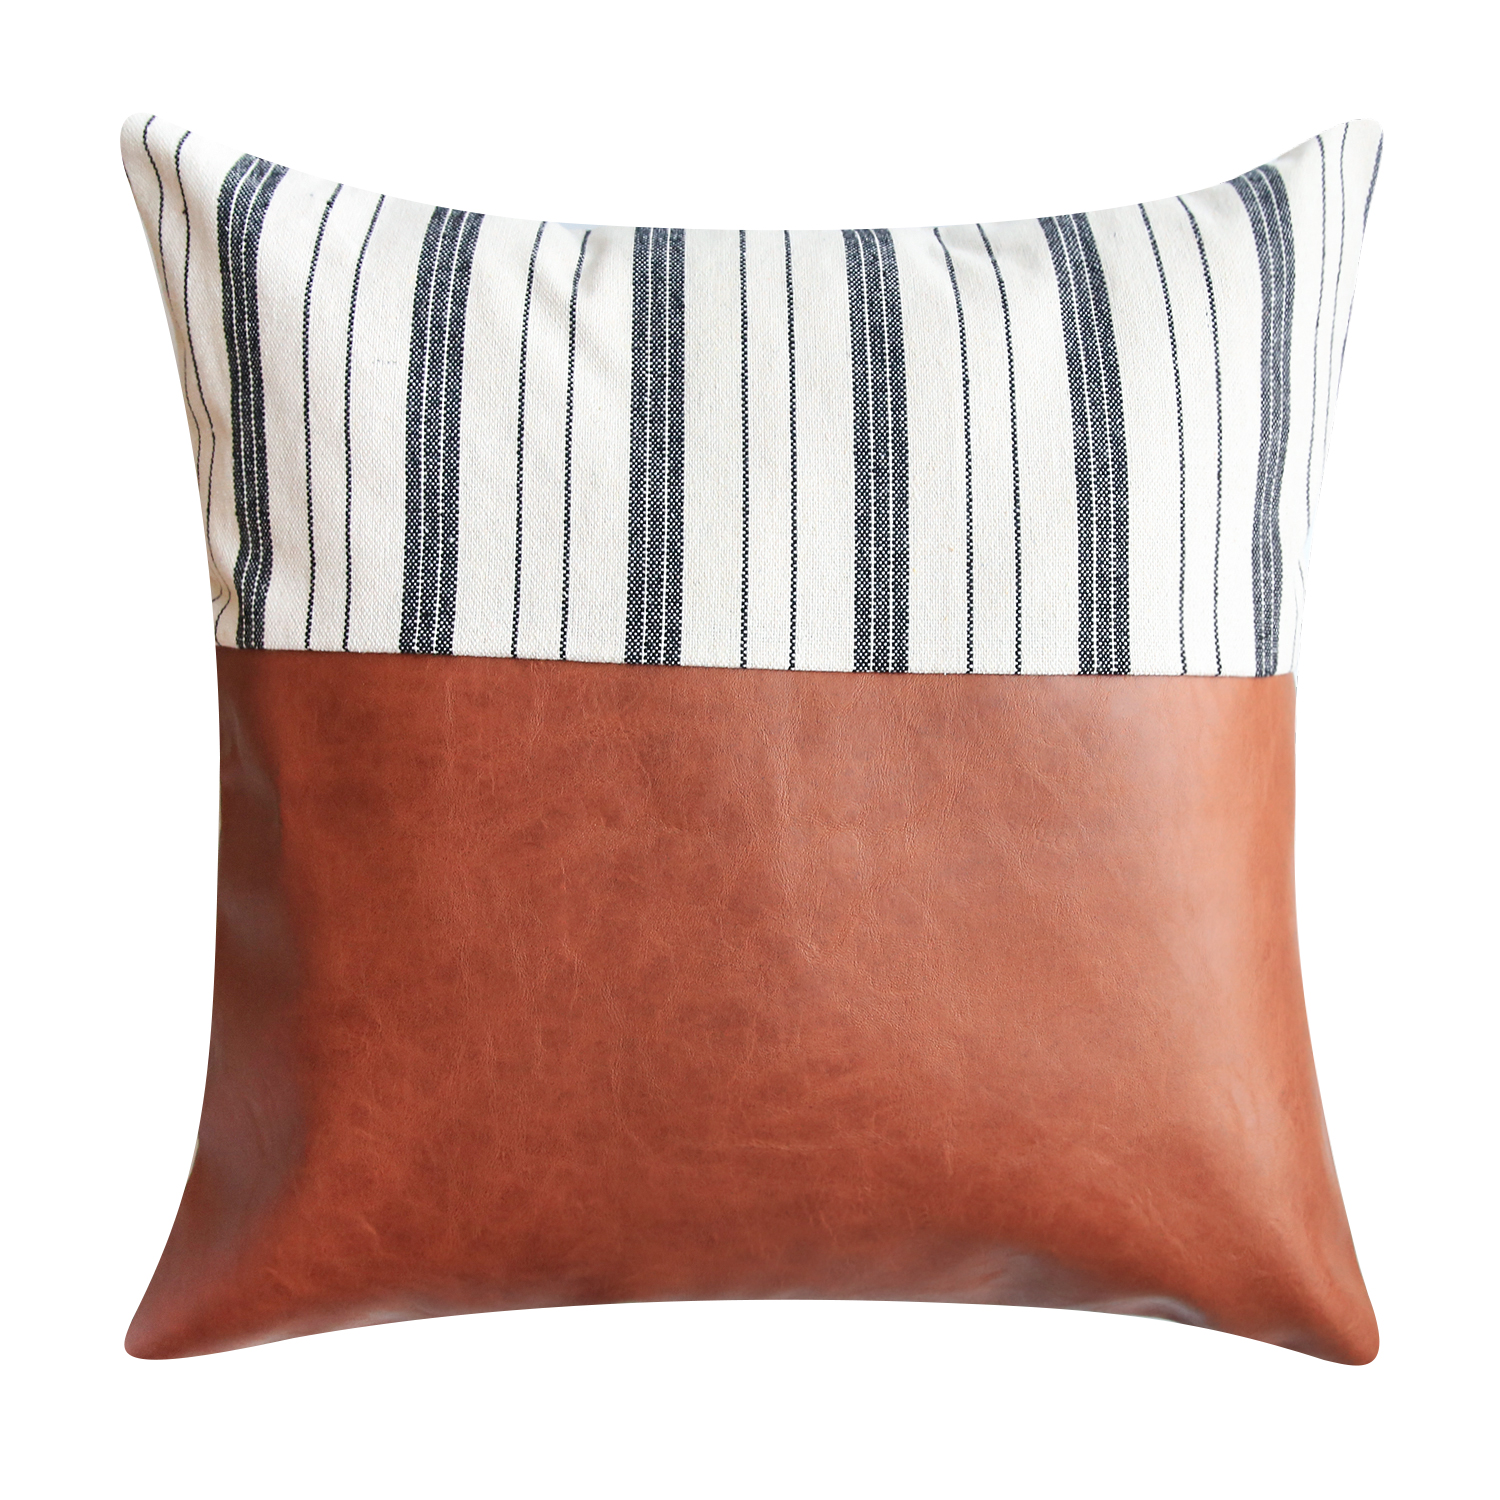 Bene Boutique Striped Faux Leather, White Faux Leather Throw Pillows